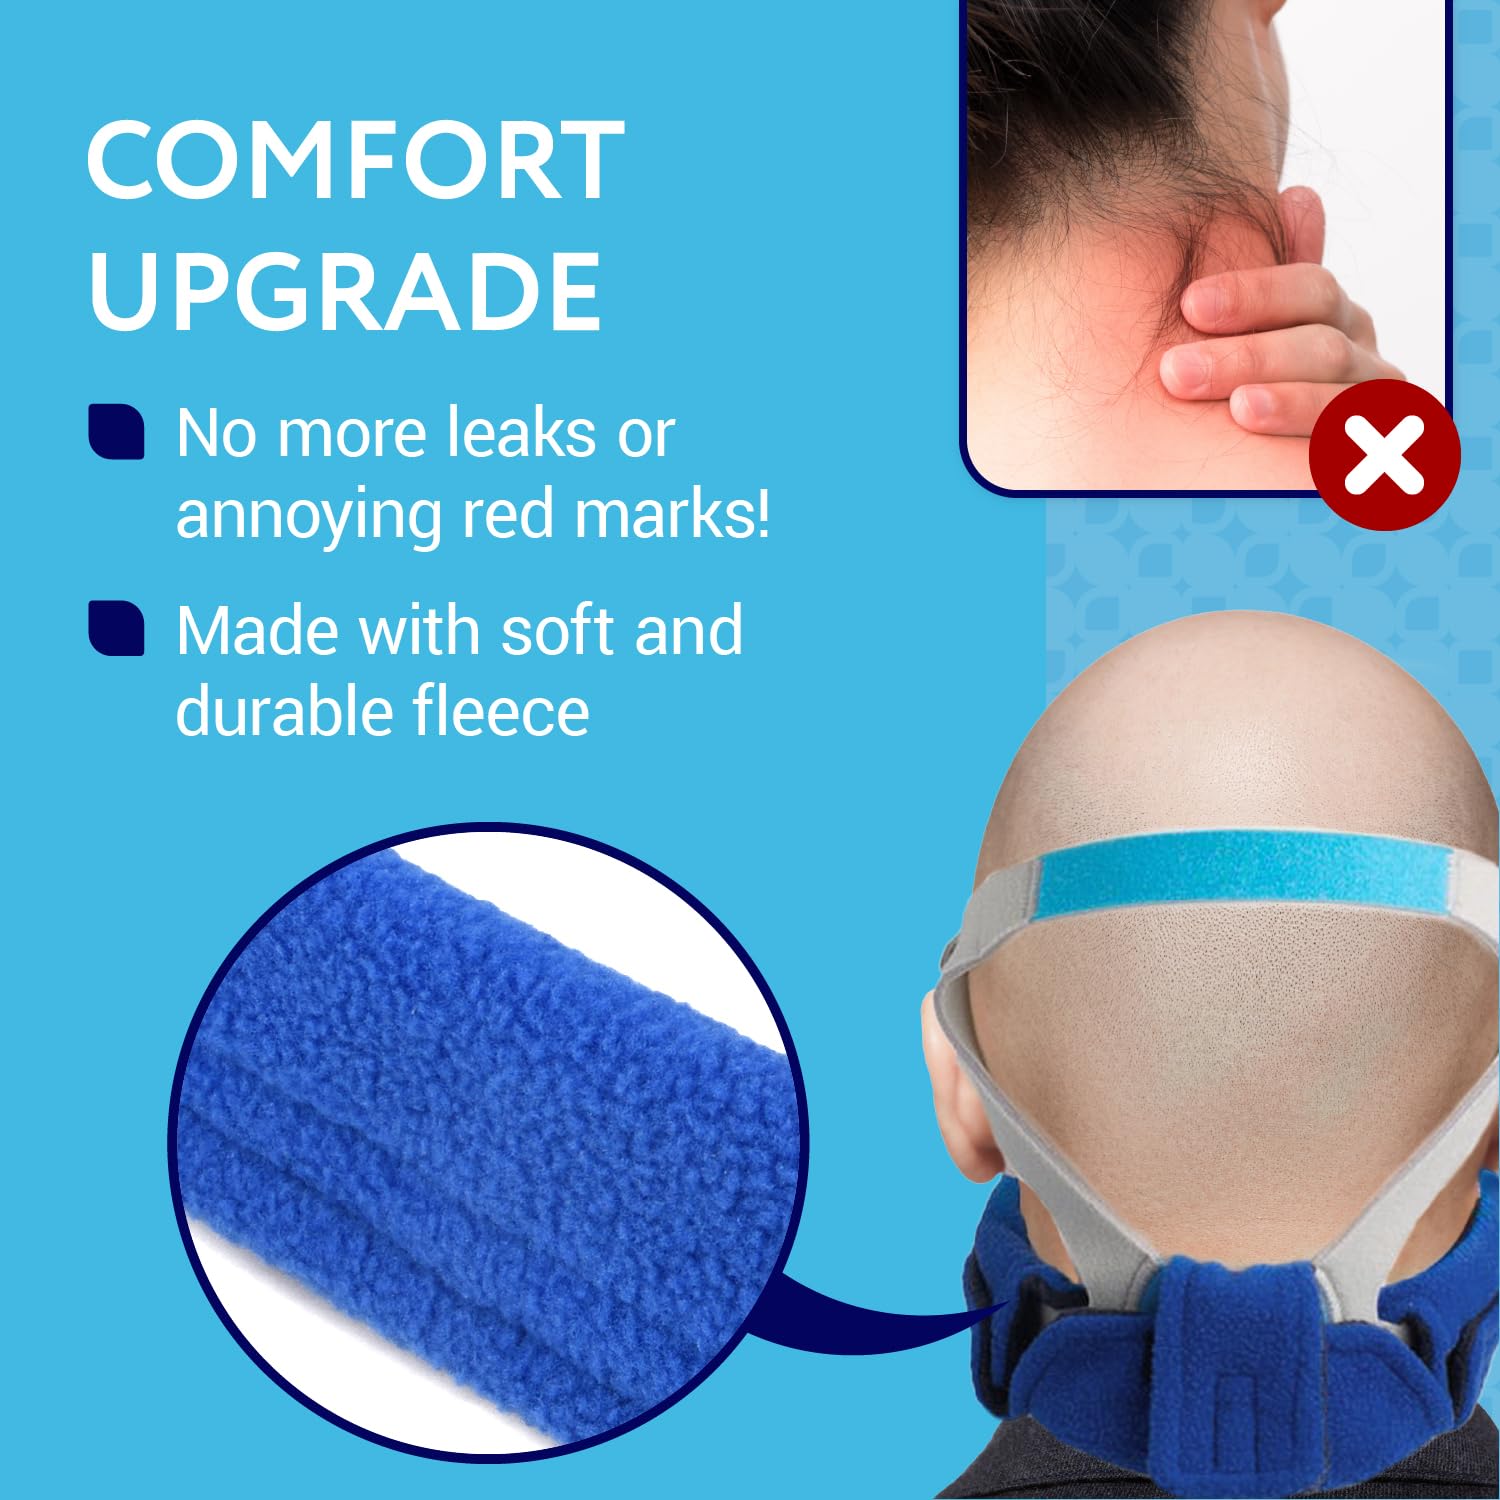 Impresa CPAP Neck Pad Cushions - Universal Headgear/Mask Head Strap Covers - Compatible with Resmed Airfit P10 / F20, Airtouch, Dreamwear and Many More Models - Reduces Face and Neck Irritation